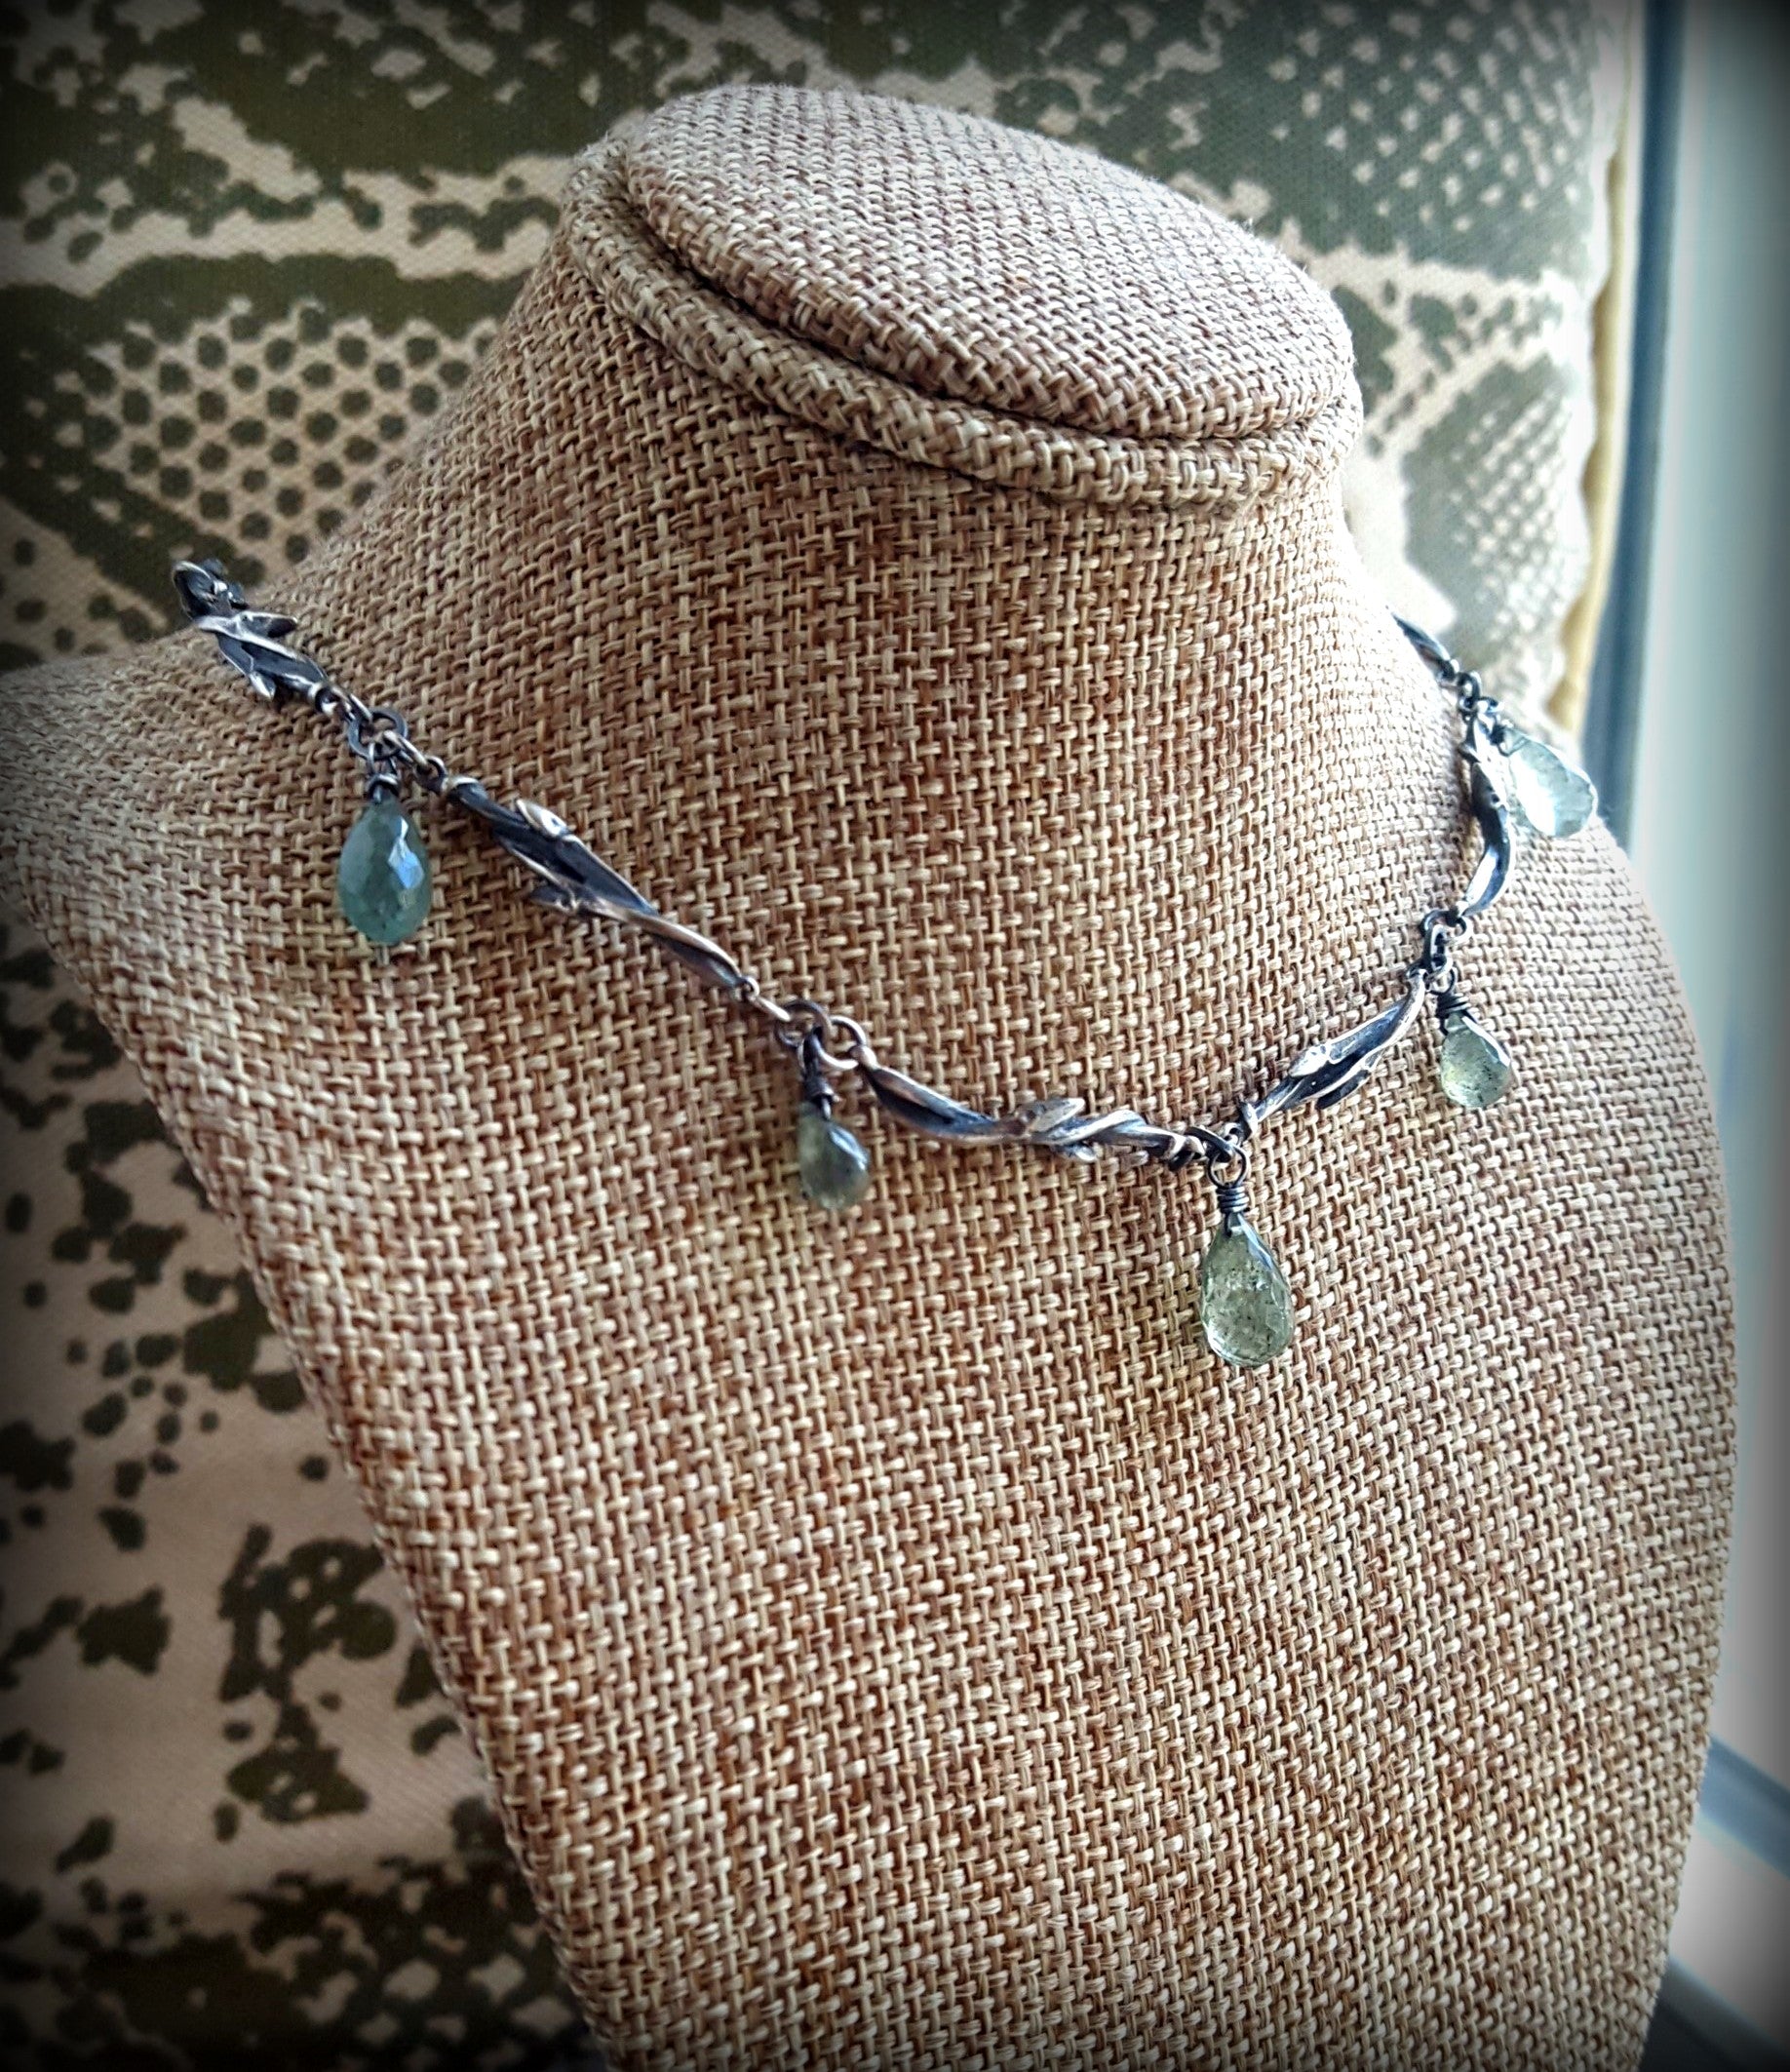 Budding Branches Briollette Necklace, Sterling and Moss Aquamarine